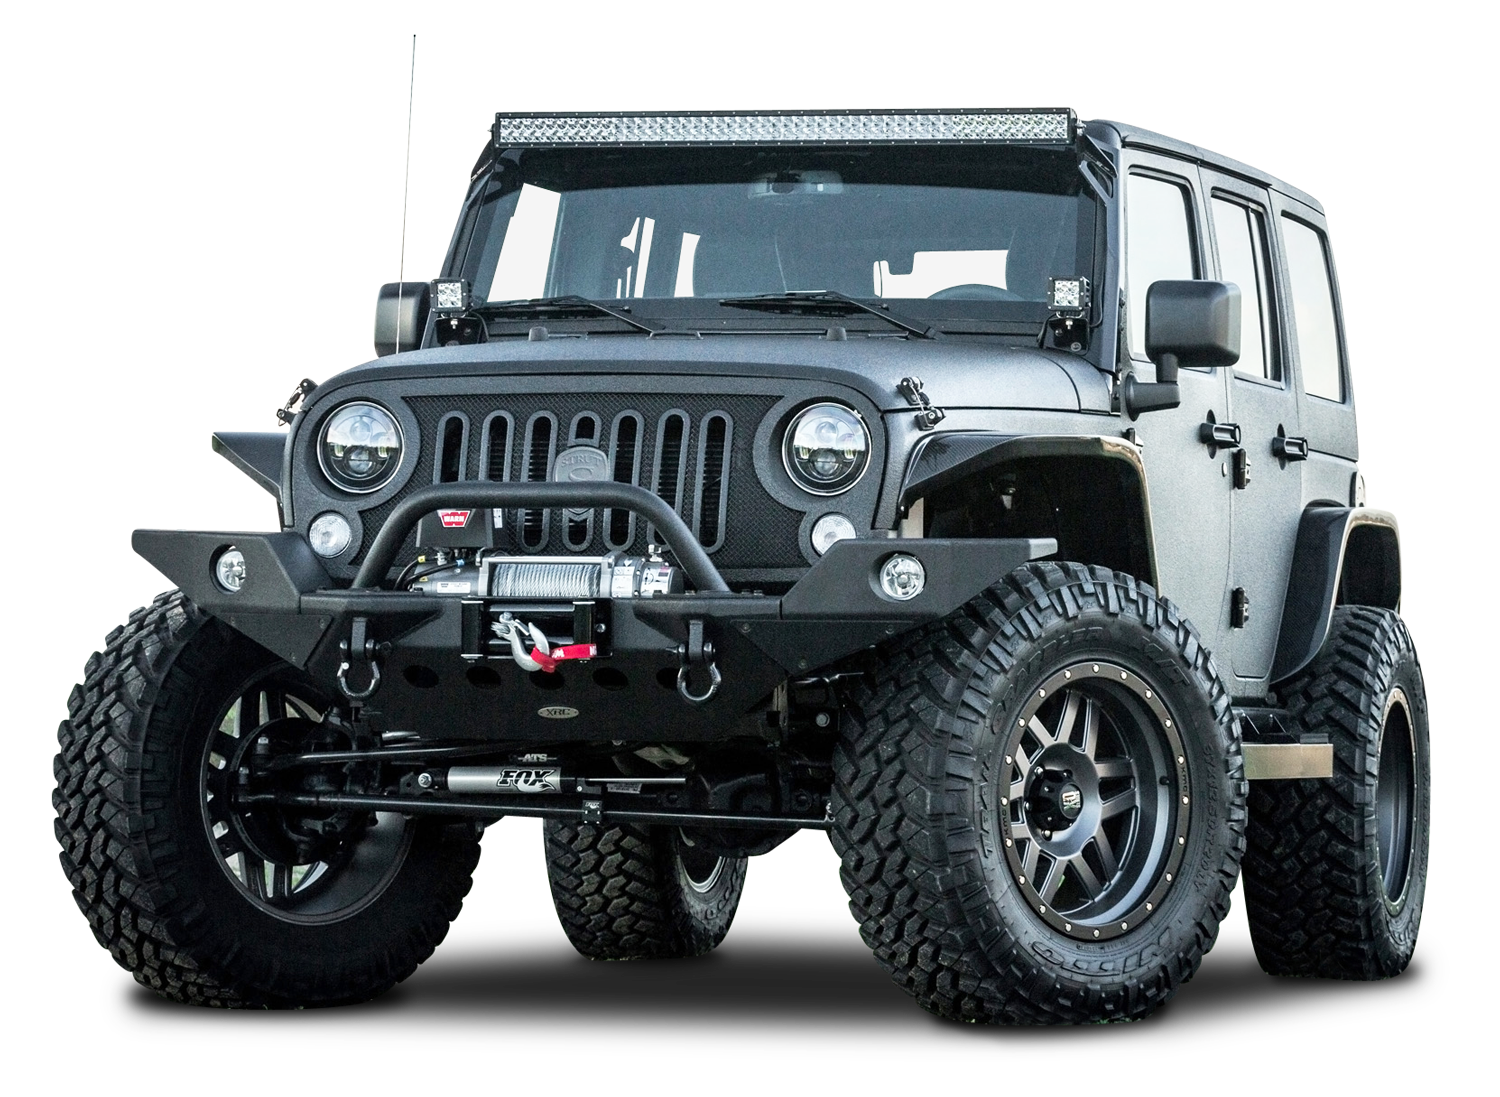 Strut Jeep Wrangler Suv Png Image - Jeep, Transparent background PNG HD thumbnail